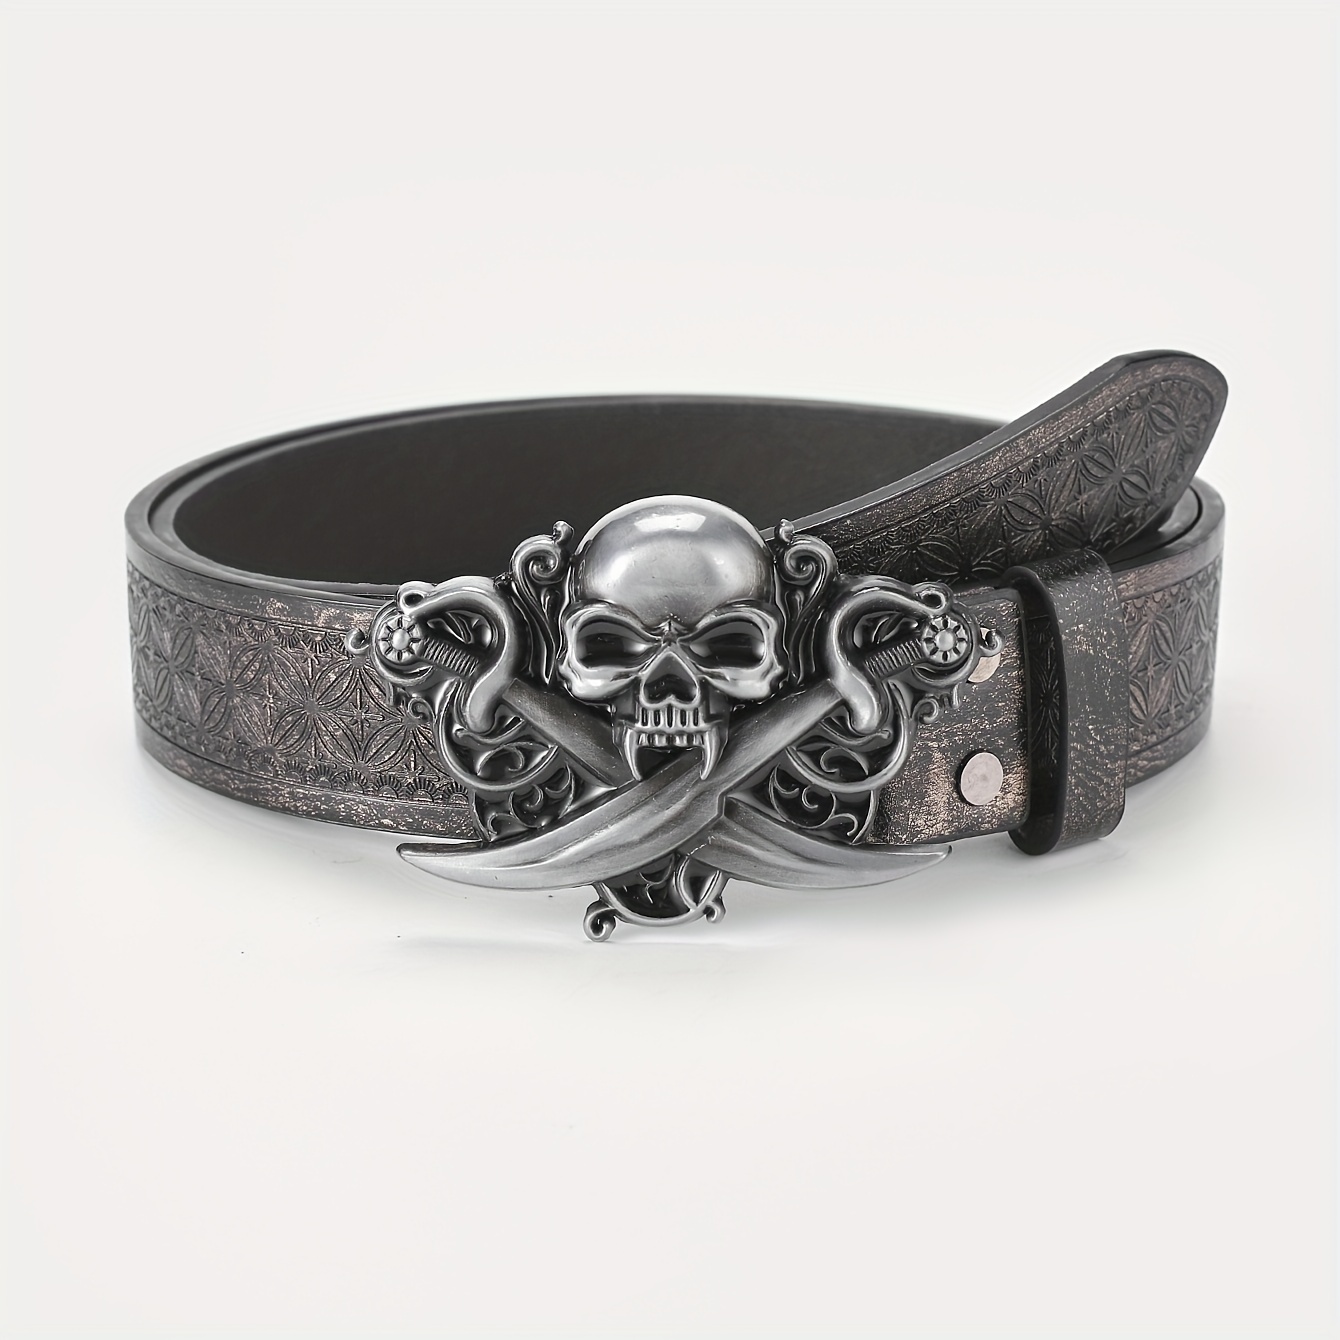 Mens Belt Fashion Skull Buckle Belt For Outdoor Party Holiday